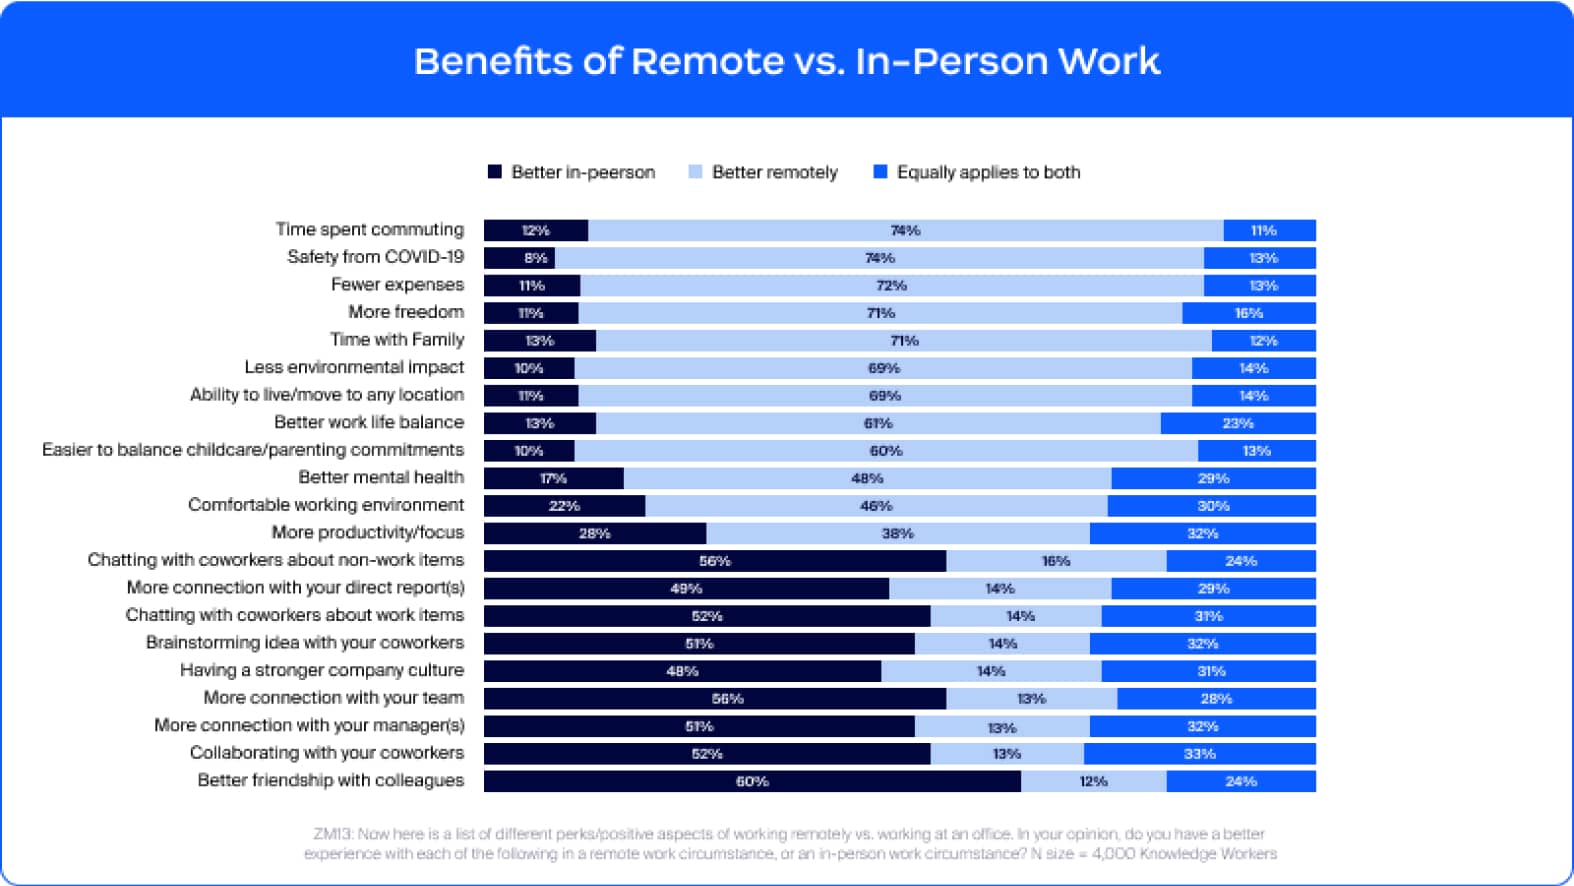 Benefits of Remote vs. In-Person Work